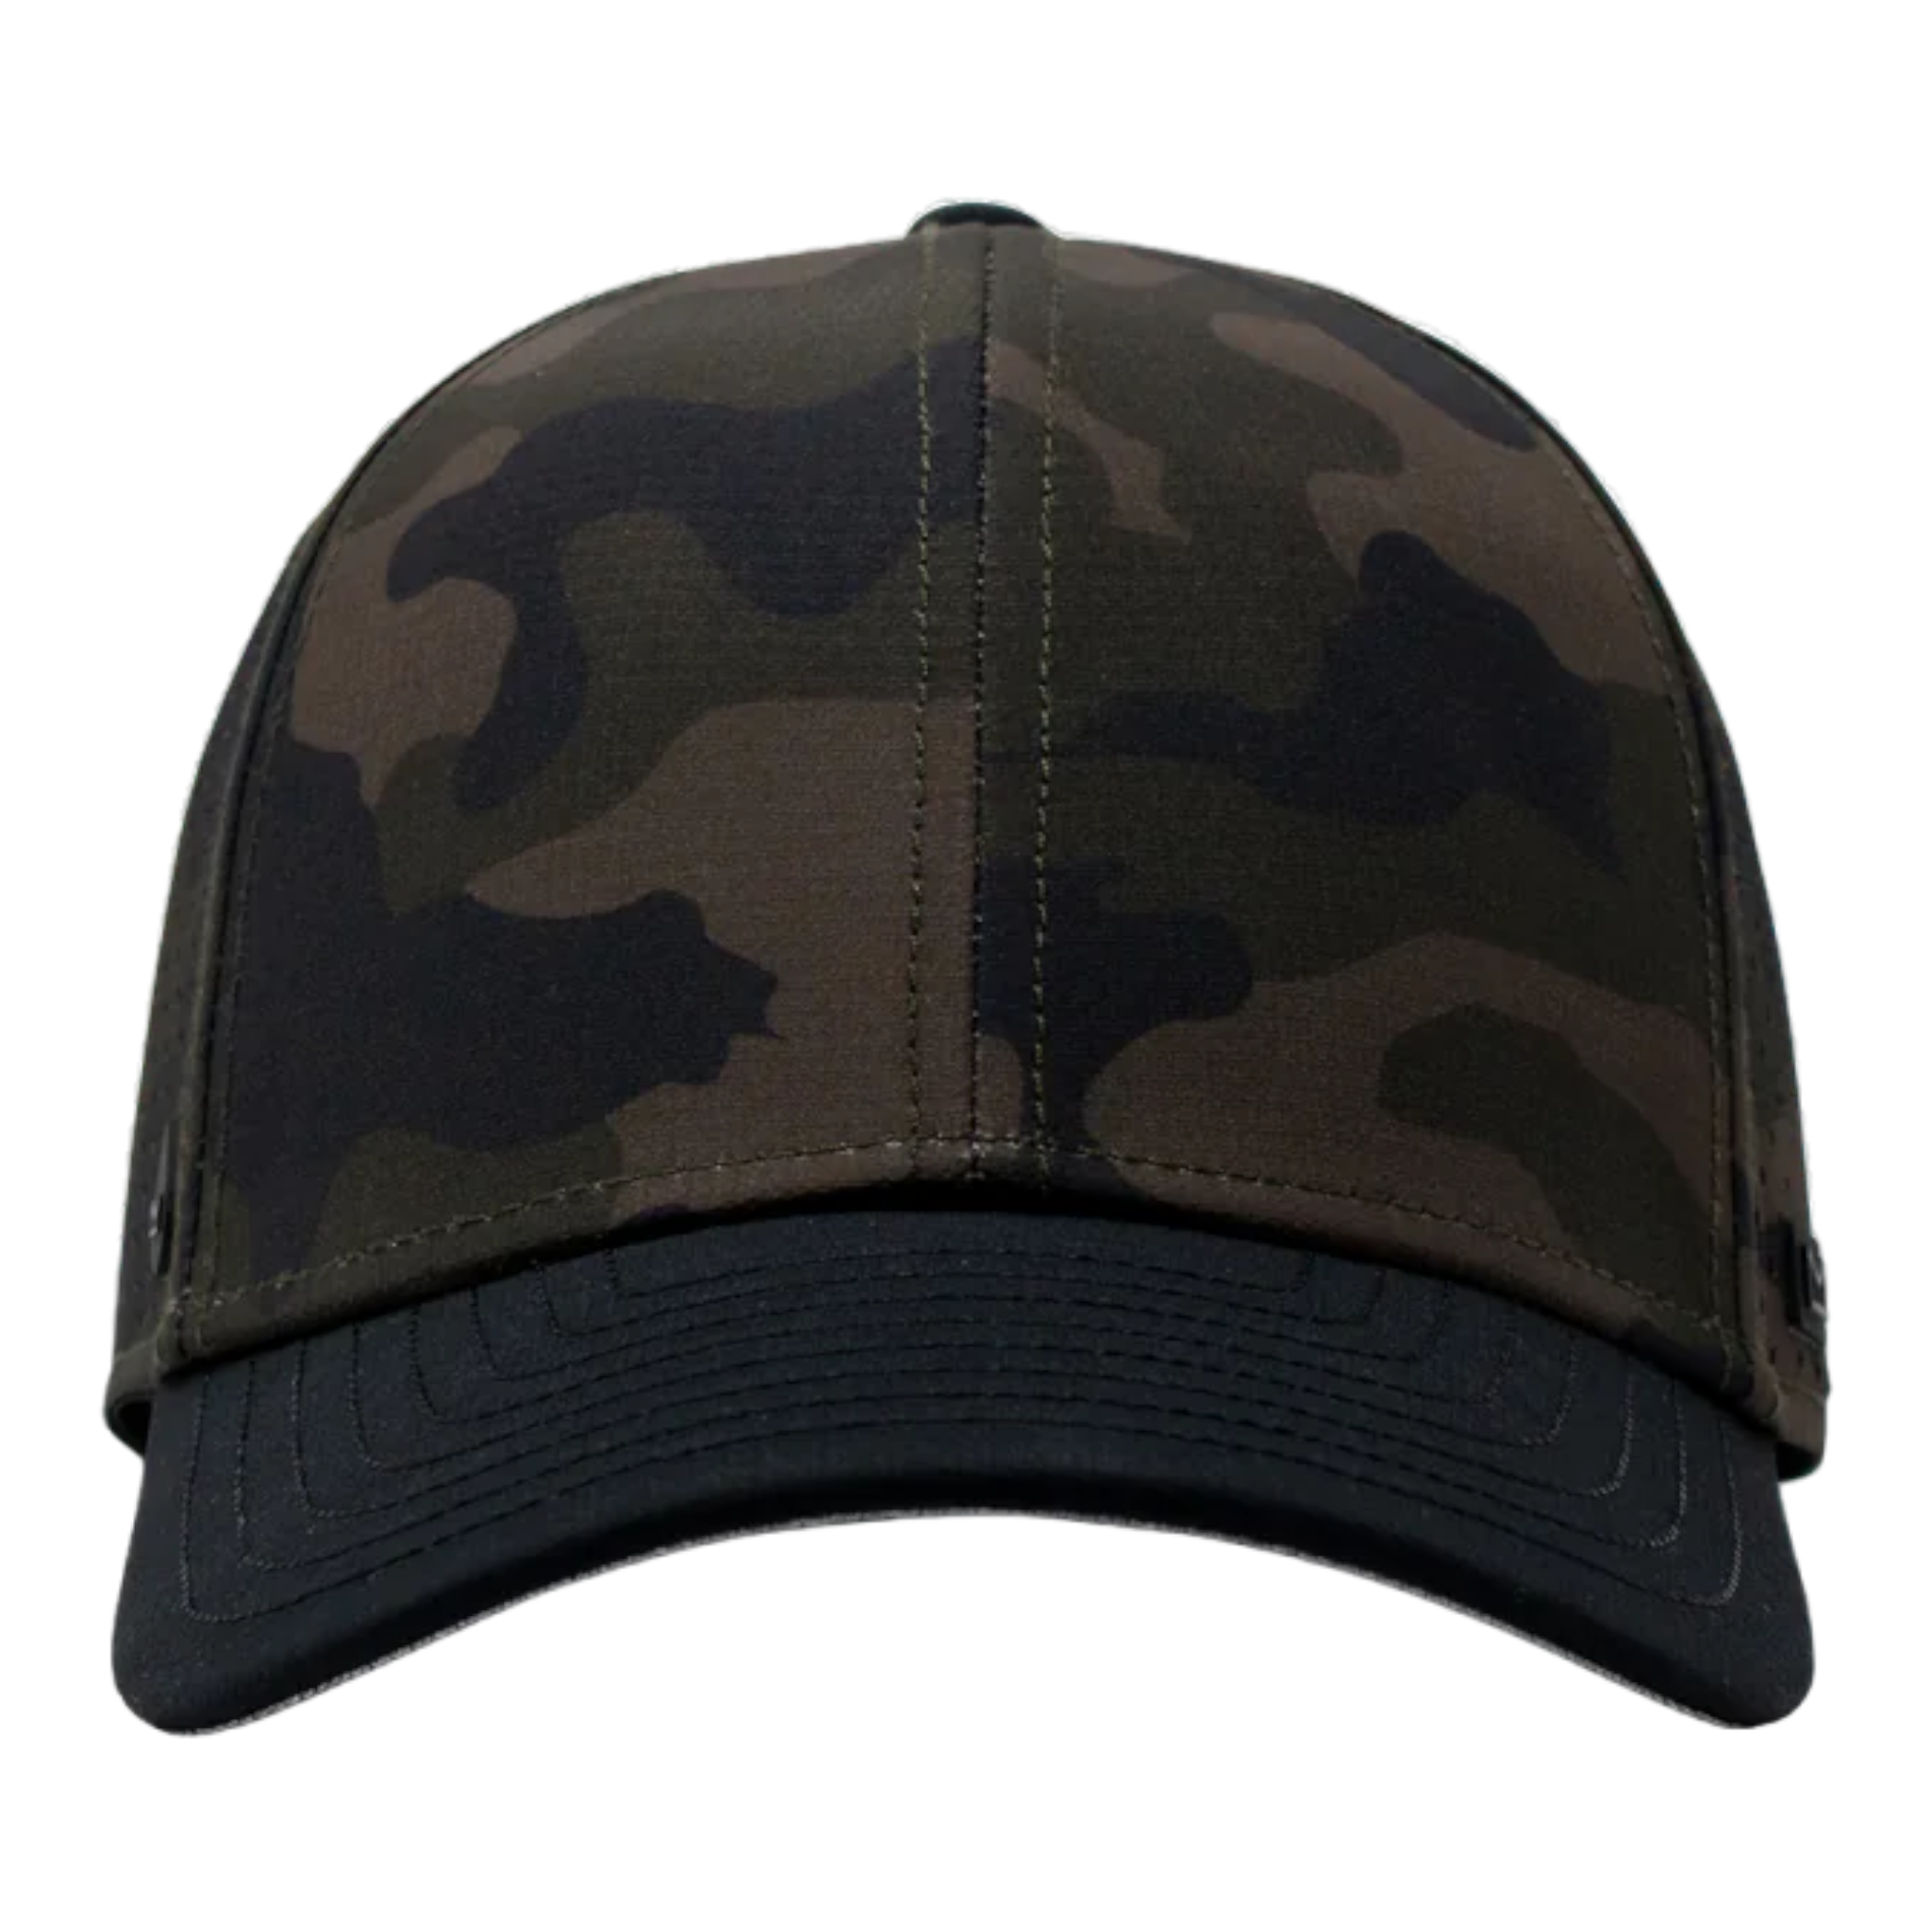 Melin Hats A-Game Hydro Olive Camo - Dardano's Shoes